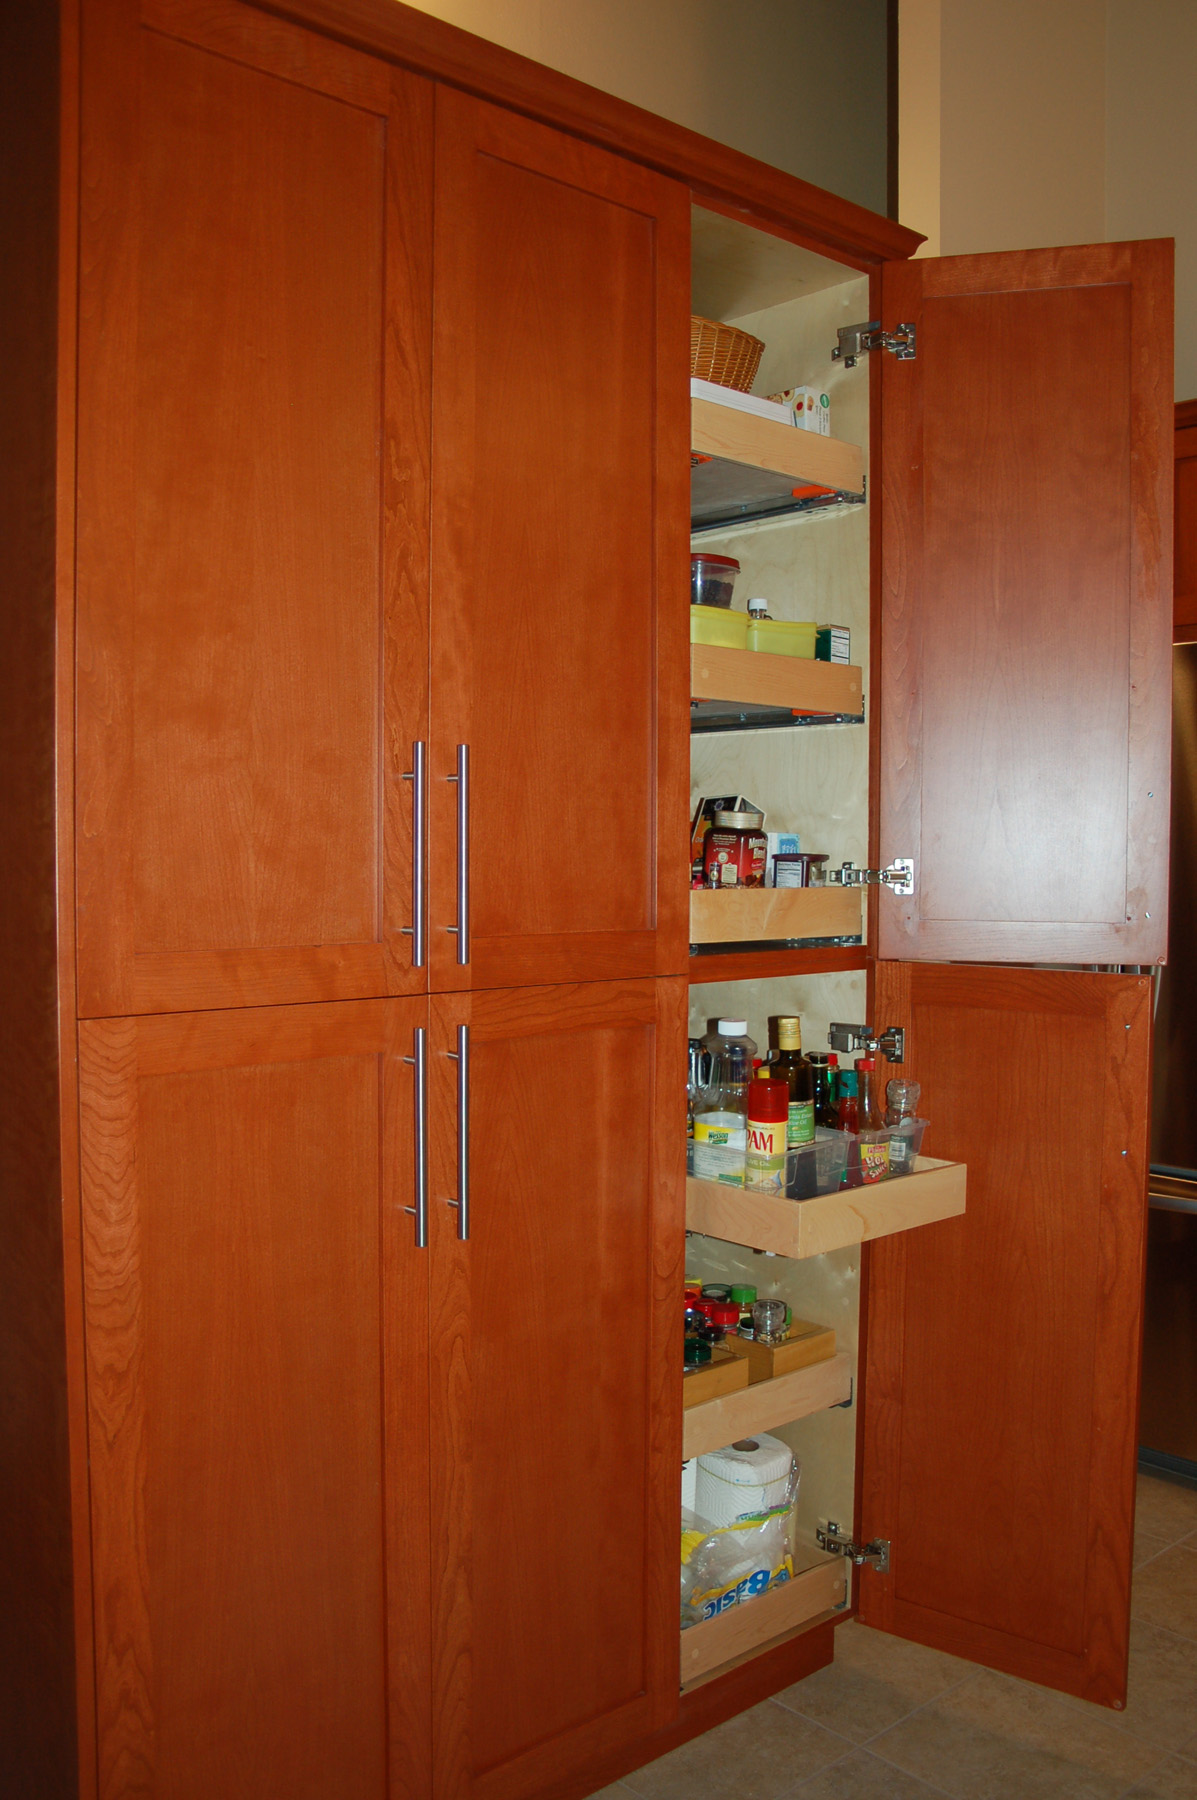 Full height cabinets with pull out drawers.